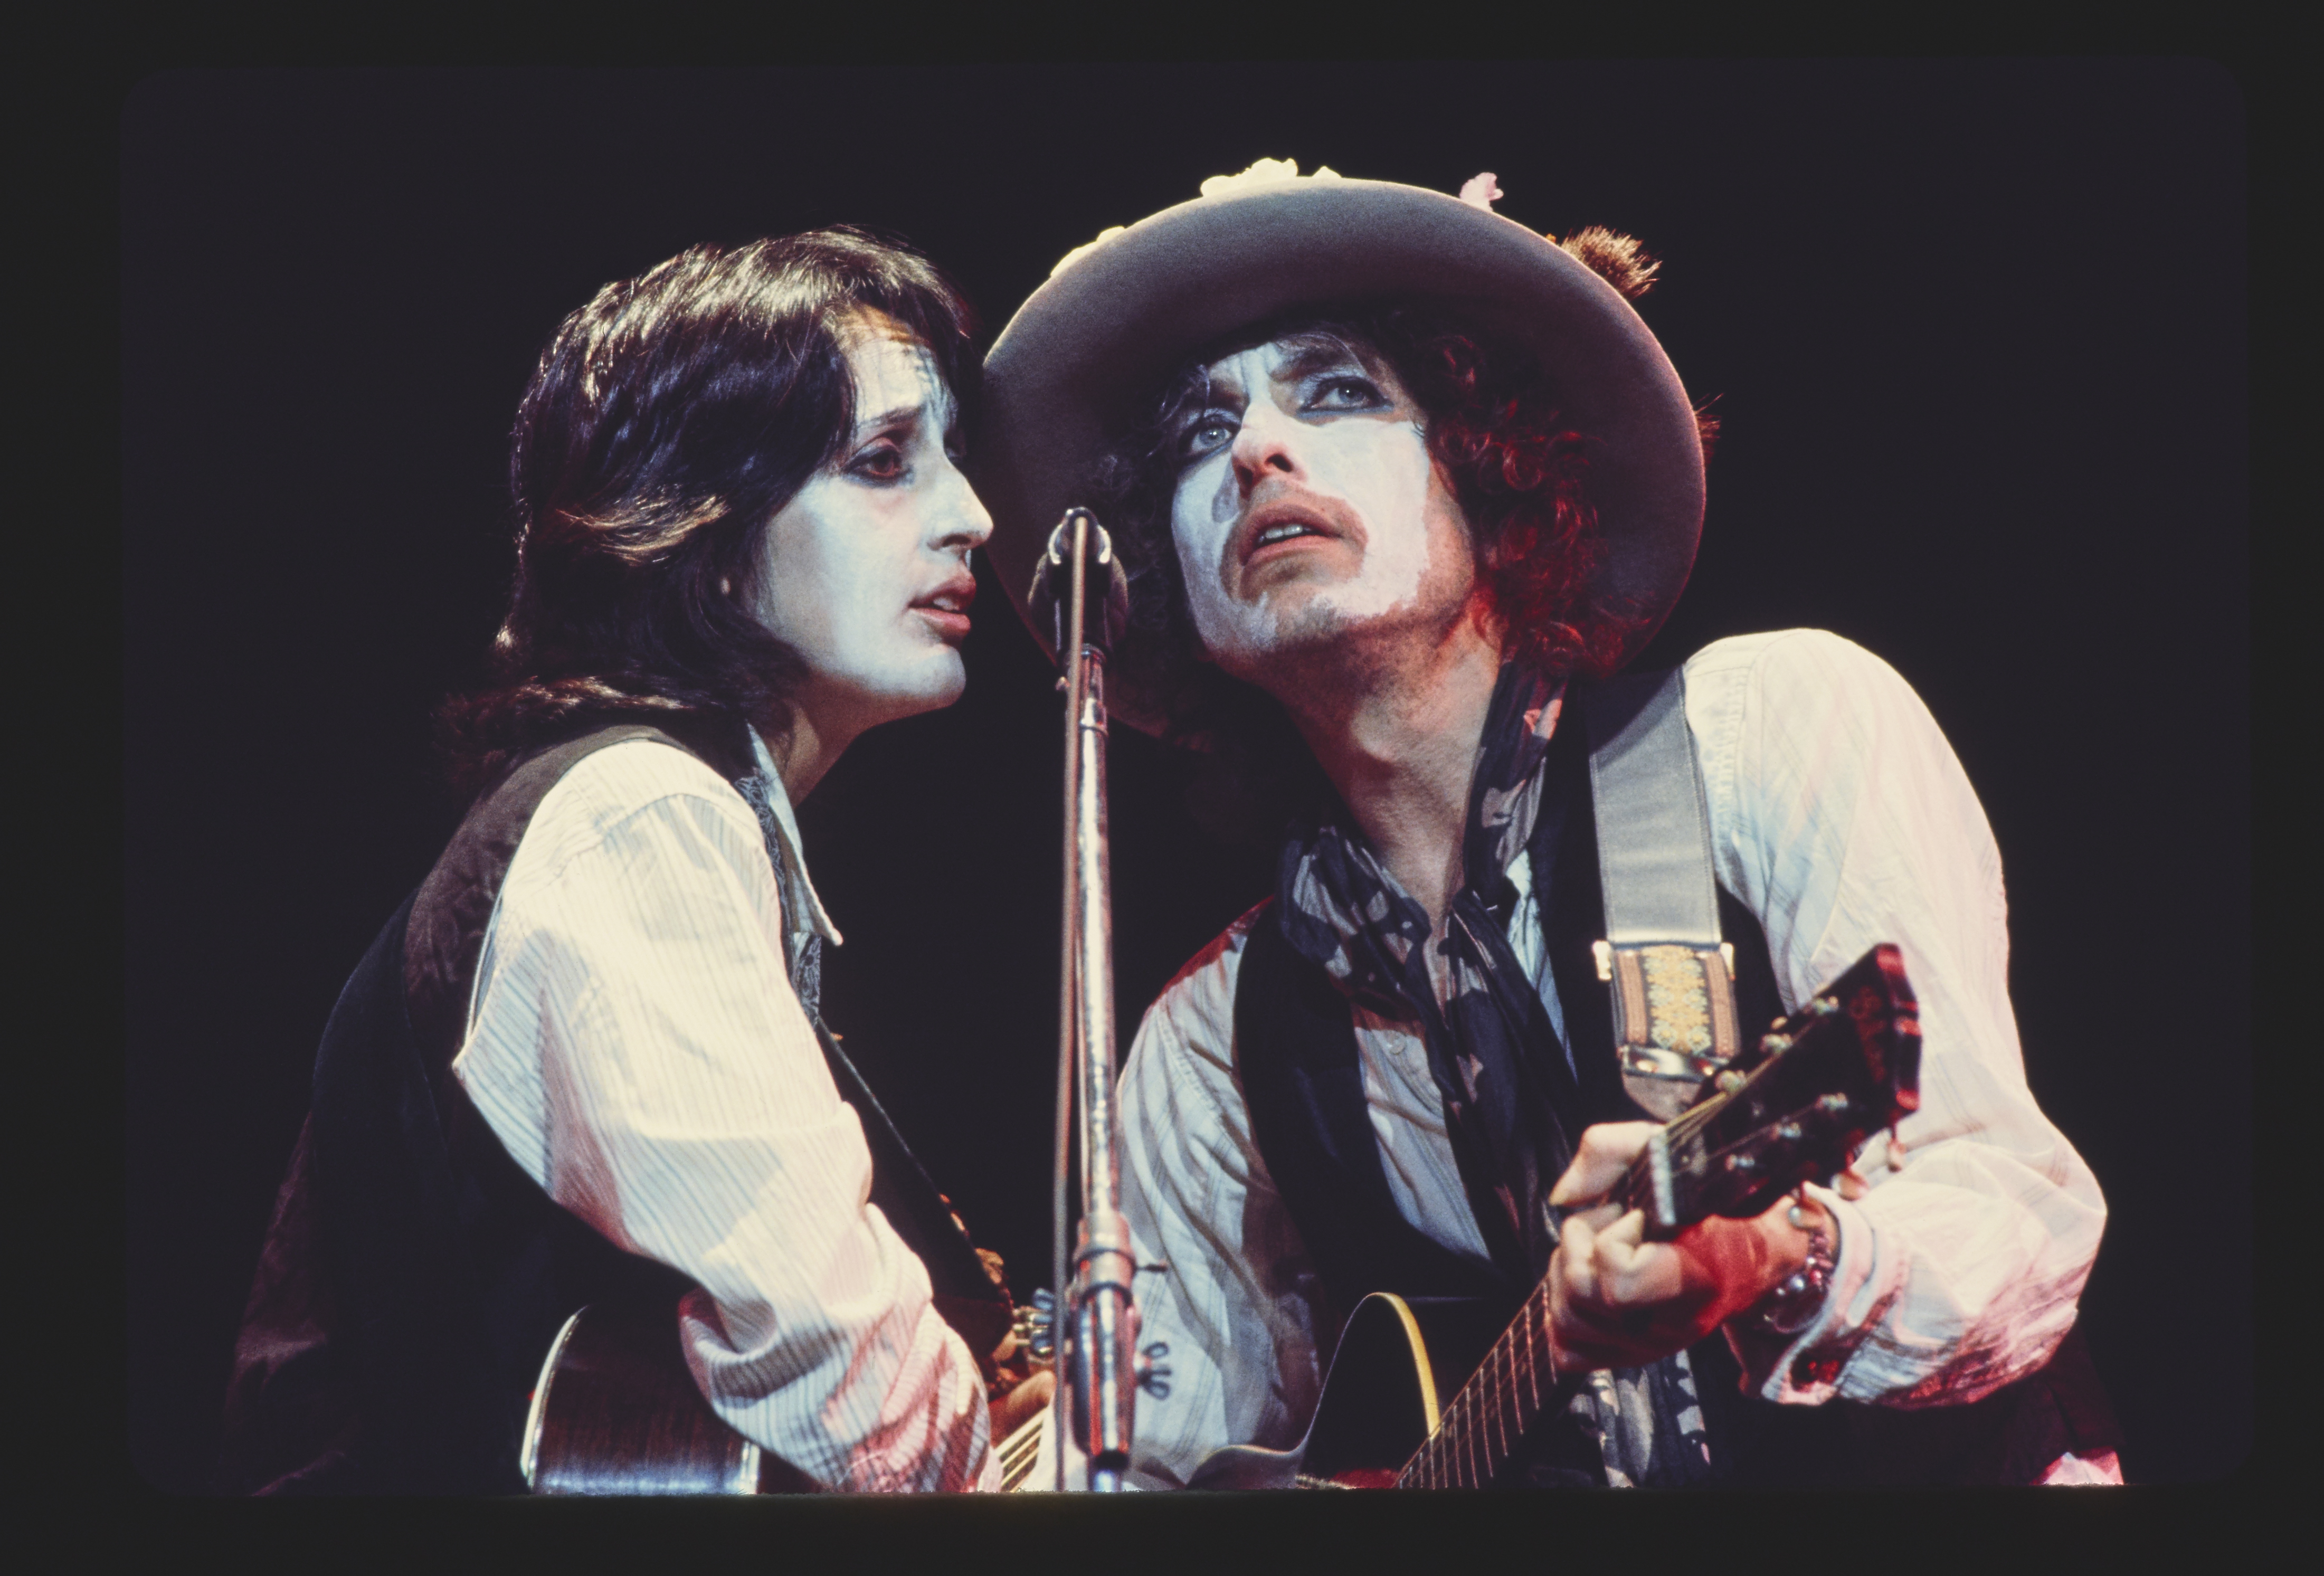 Joan Baez, left, and Bob Dylan, as seen in "Rolling Thunder Revue: A Bob Dylan Story by Martin Scorsese." (Netflix)